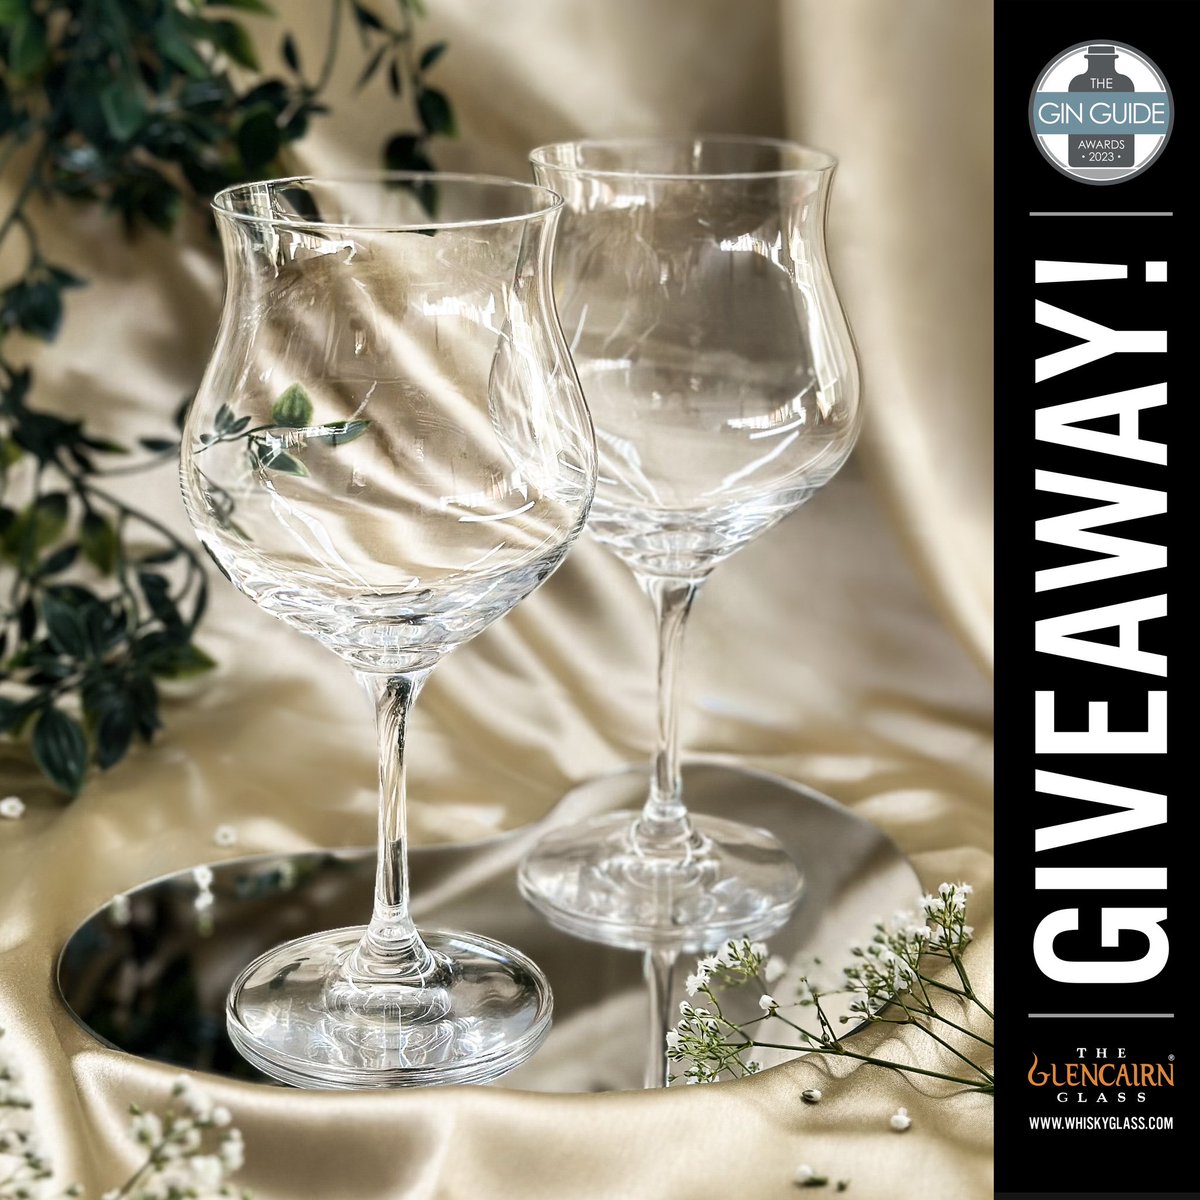 Don’t miss our fantastic giveaway with @GlencairnGlass, with the chance to win one of 3 pairs of Gin Goblets! Head on over to our Facebook page now to enter: m.facebook.com/10006467293027… #gin #giveaway